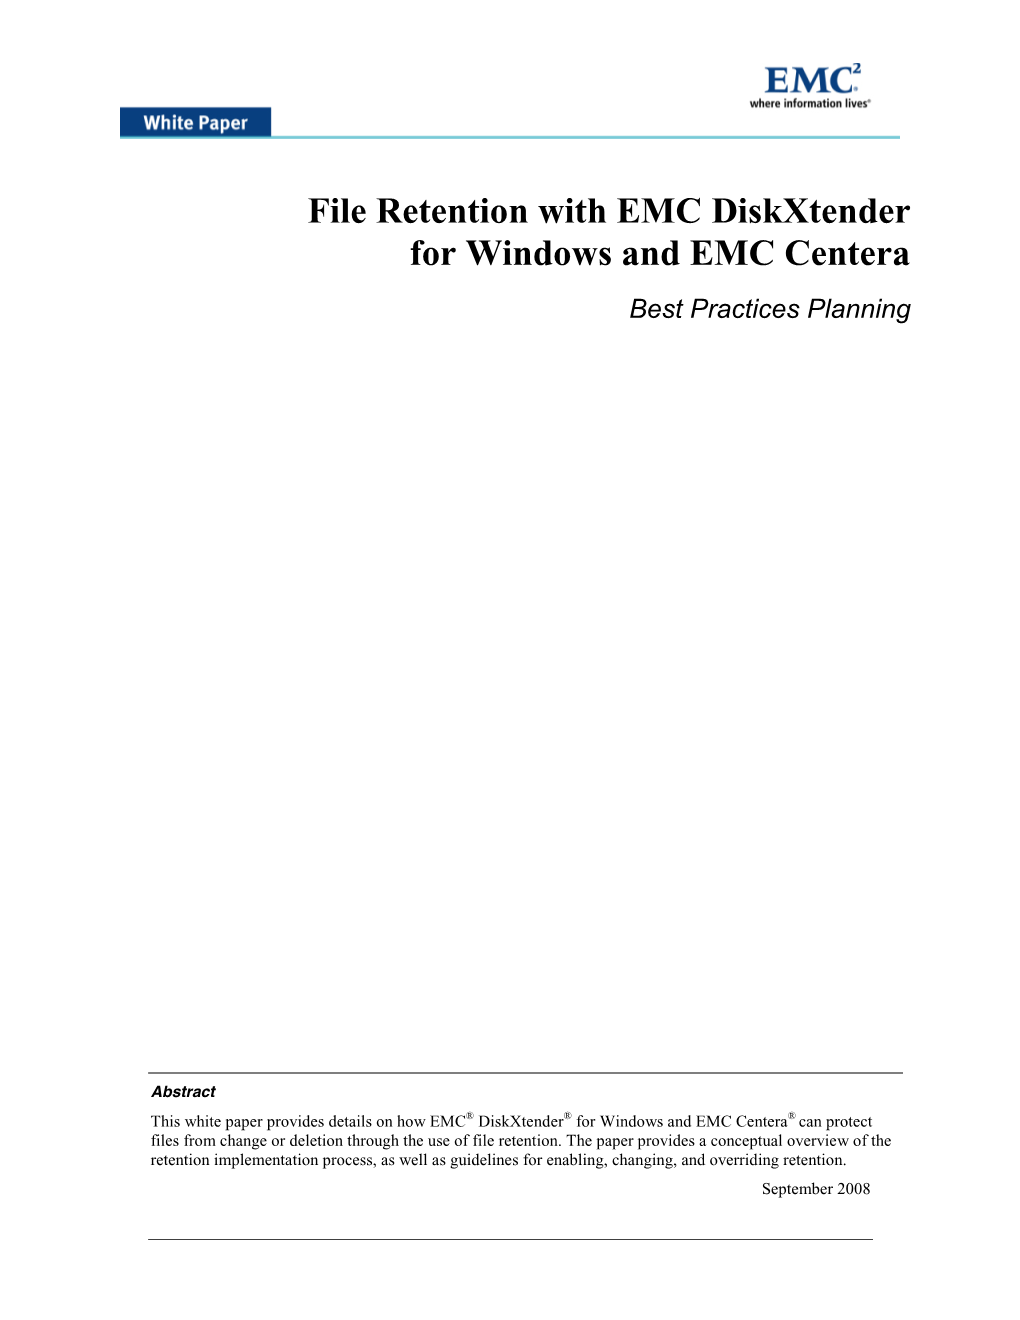 File Retention with EMC Diskxtender for Windows and EMC Centera Best Practices Planning